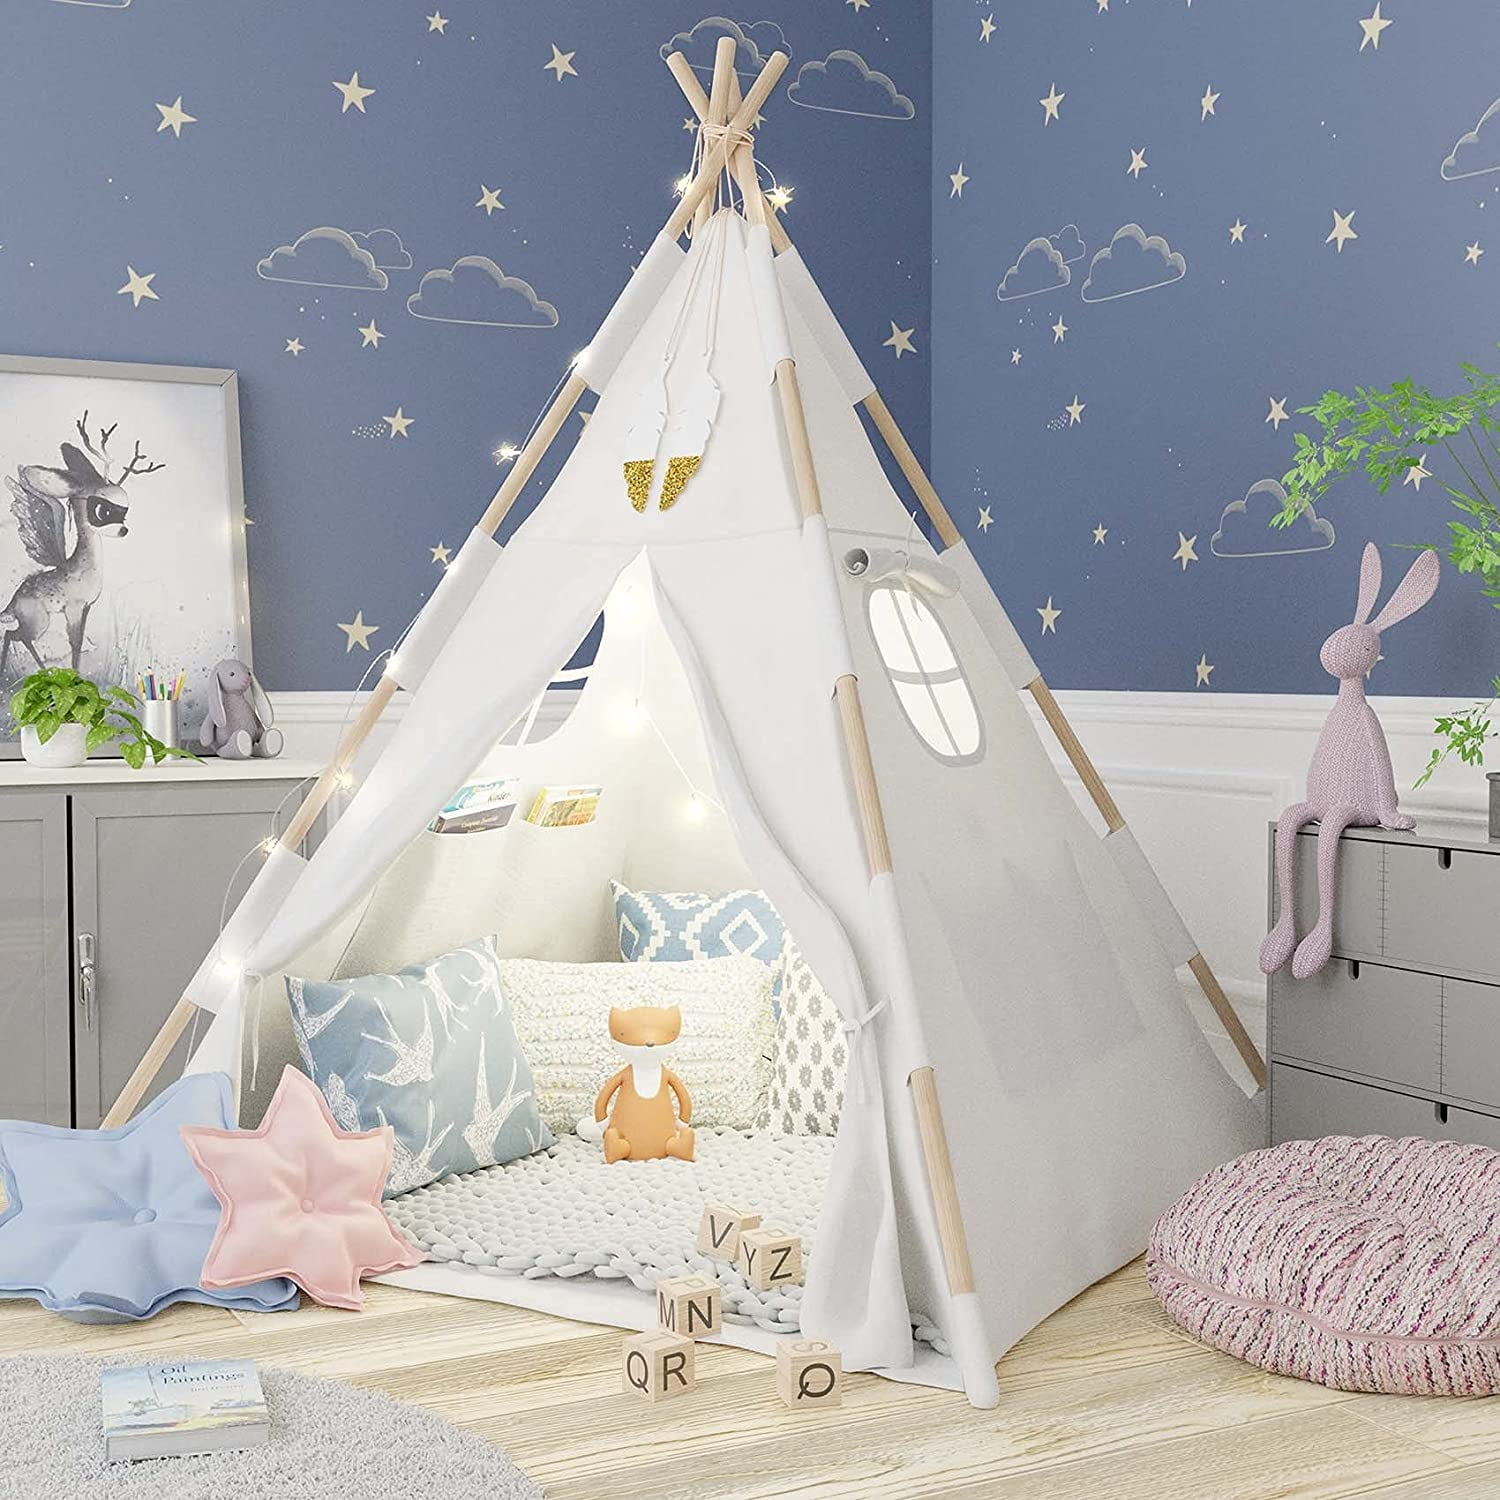 Feathers Kids Teepee Tent For Kids With Fairy Lights Waterproof Base 